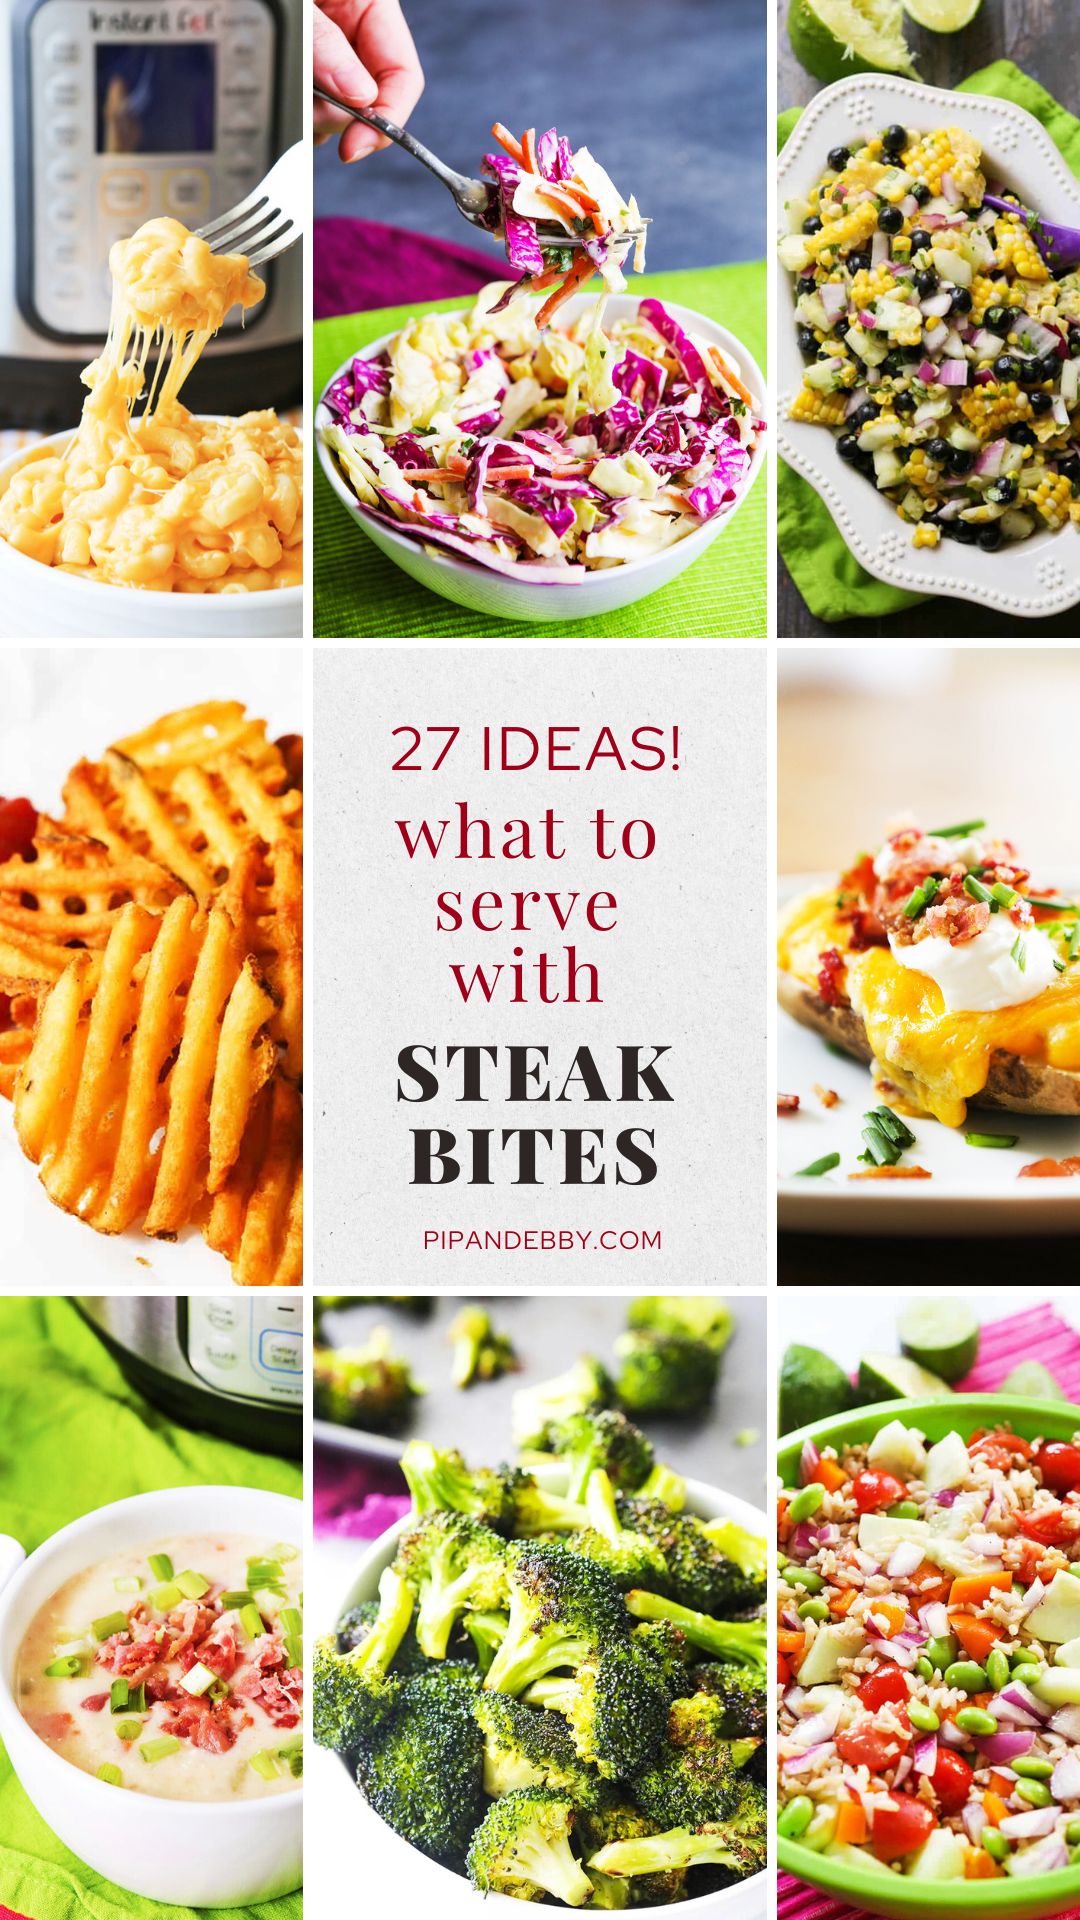 Six food photos in a grid, with text overlay reading, "27 ideas! What to serve with steak bites."